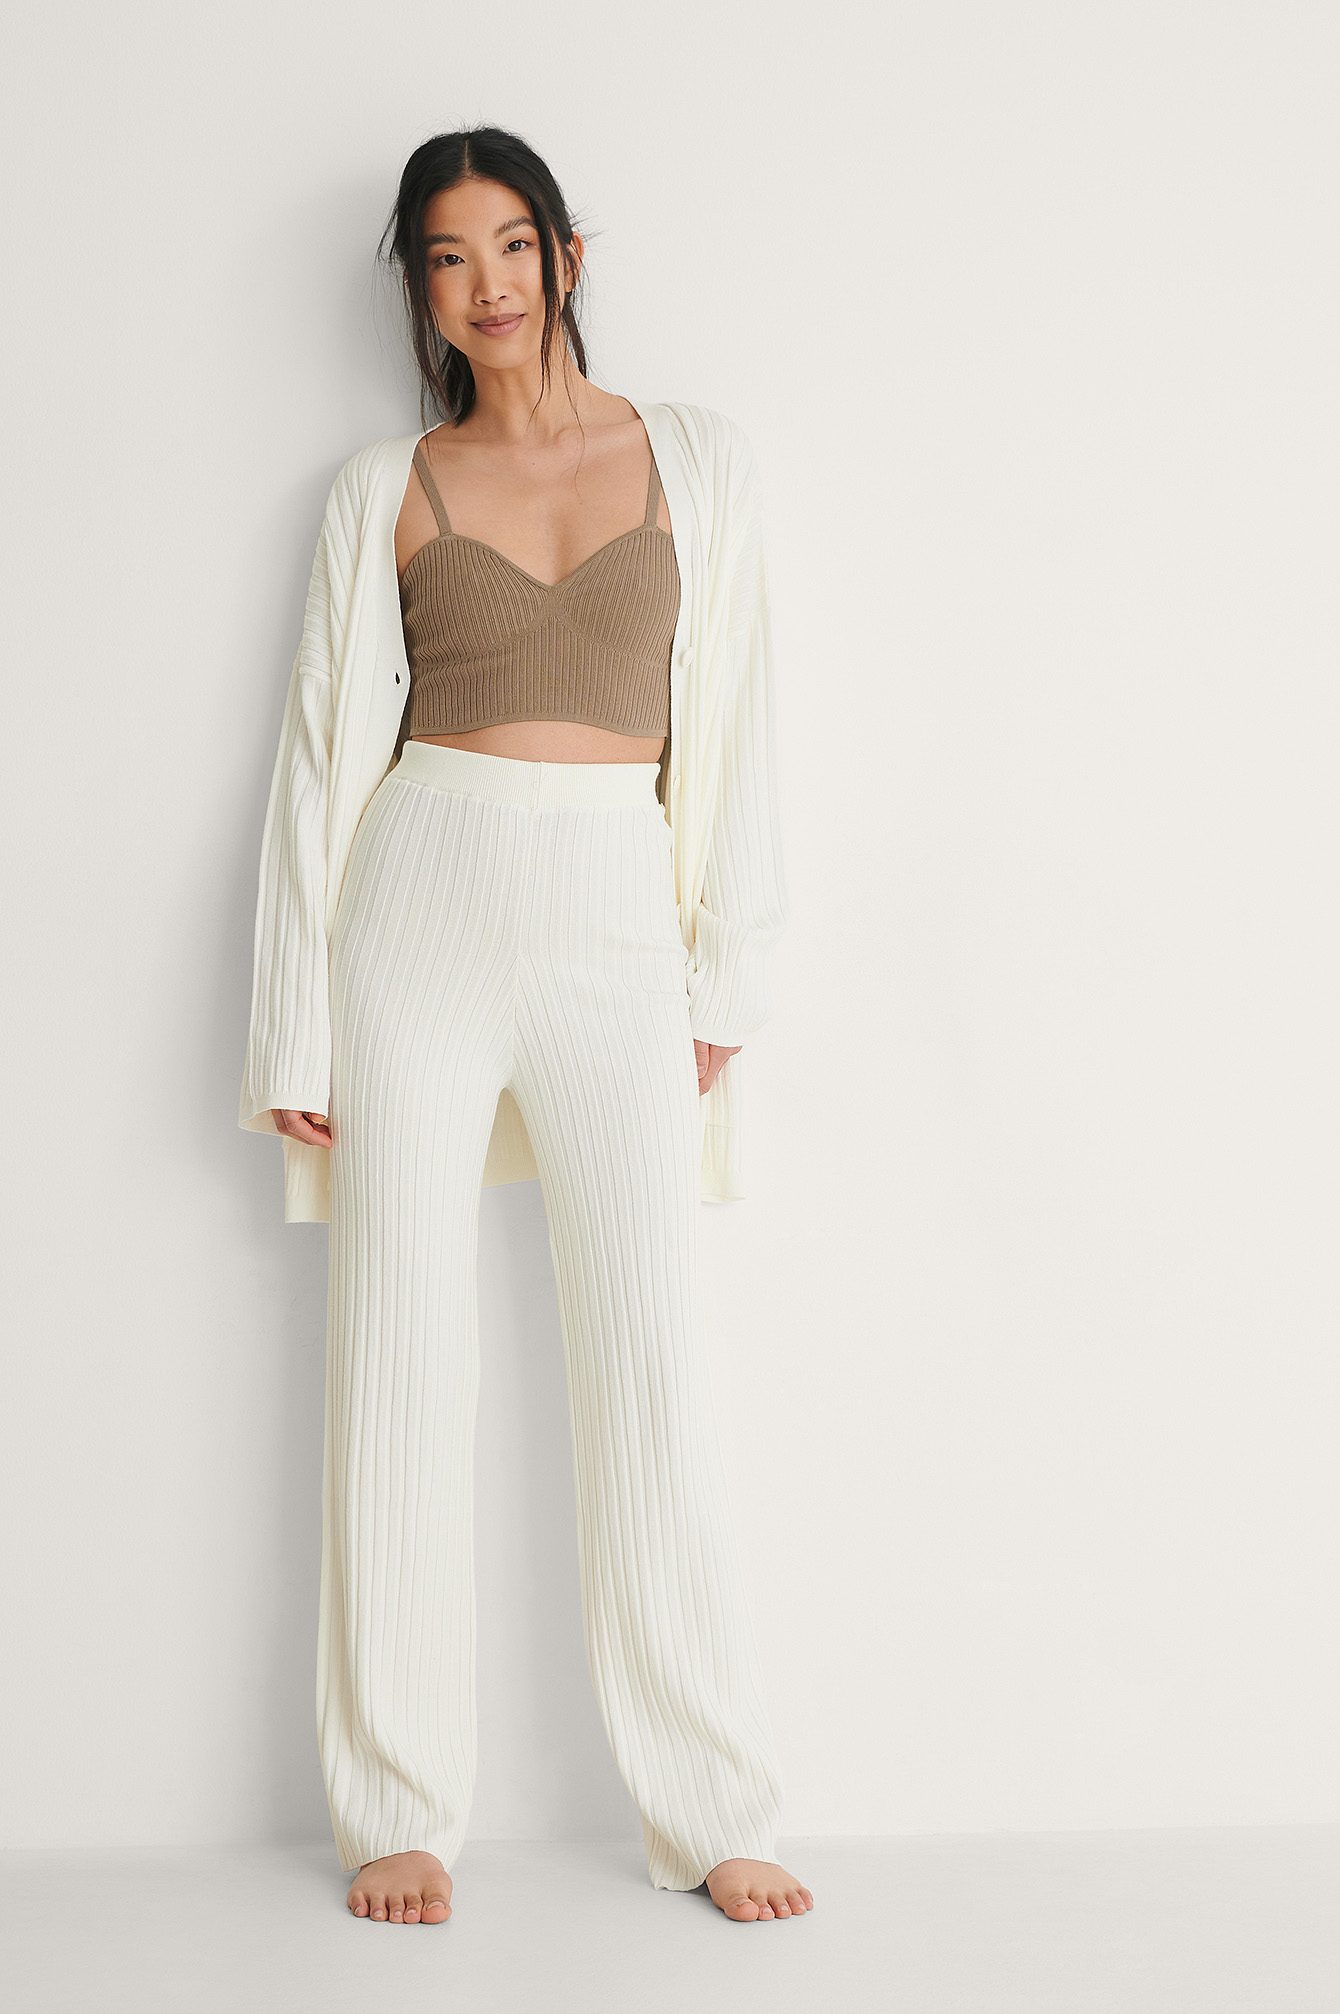 https://www.na-kd.com/globalassets/nakd_ribbed_knitted_trousers_1100-004562-0001_01c.jpg?ref=A5A8D7A054